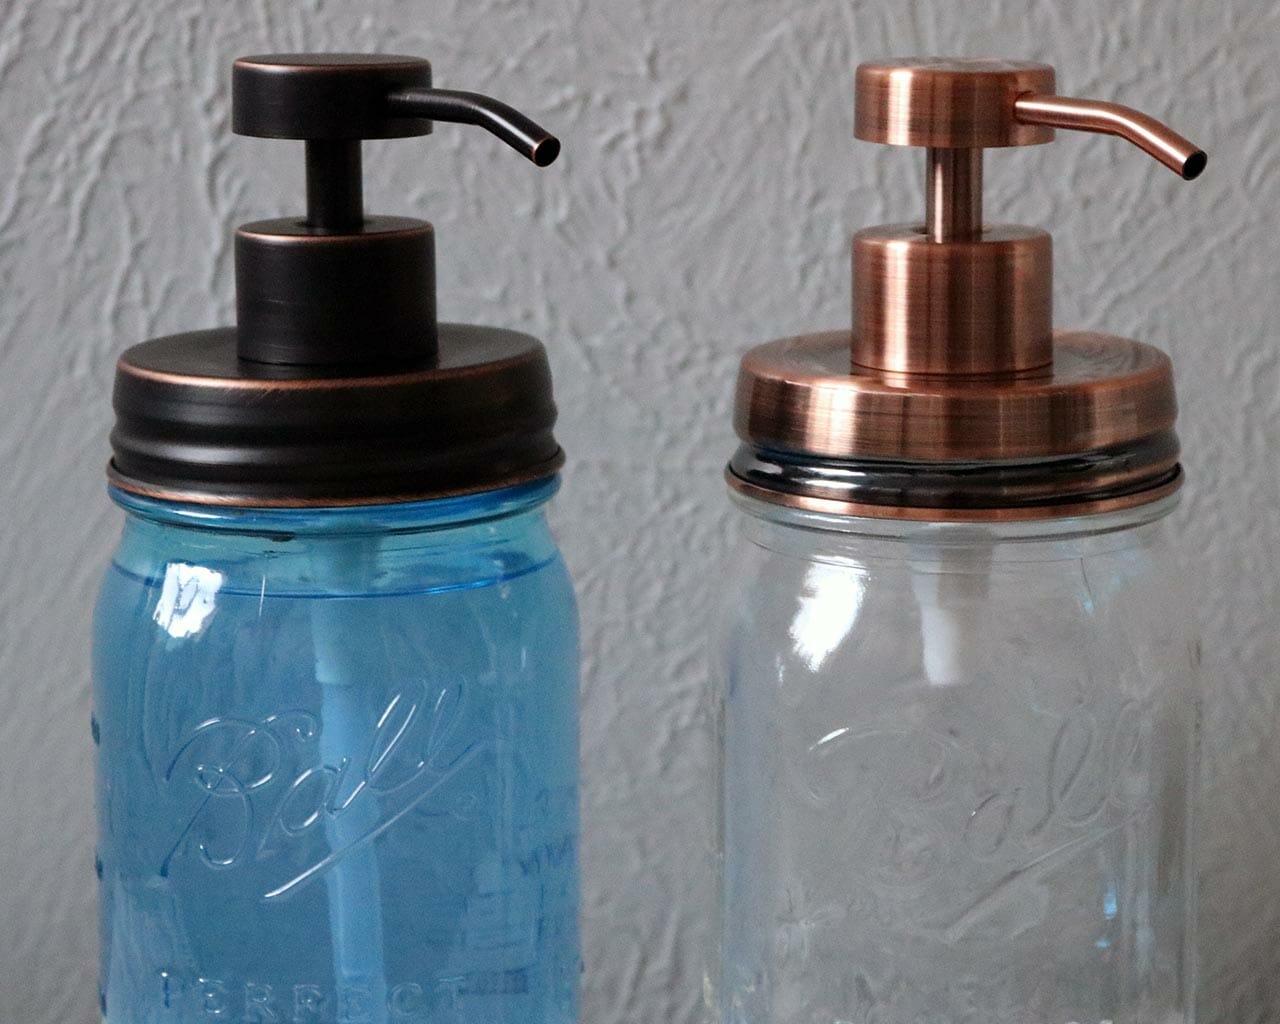 Vintage copper and oil rubbed bronze soap pump dispenser lid kits on regular mouth Ball Mason jars